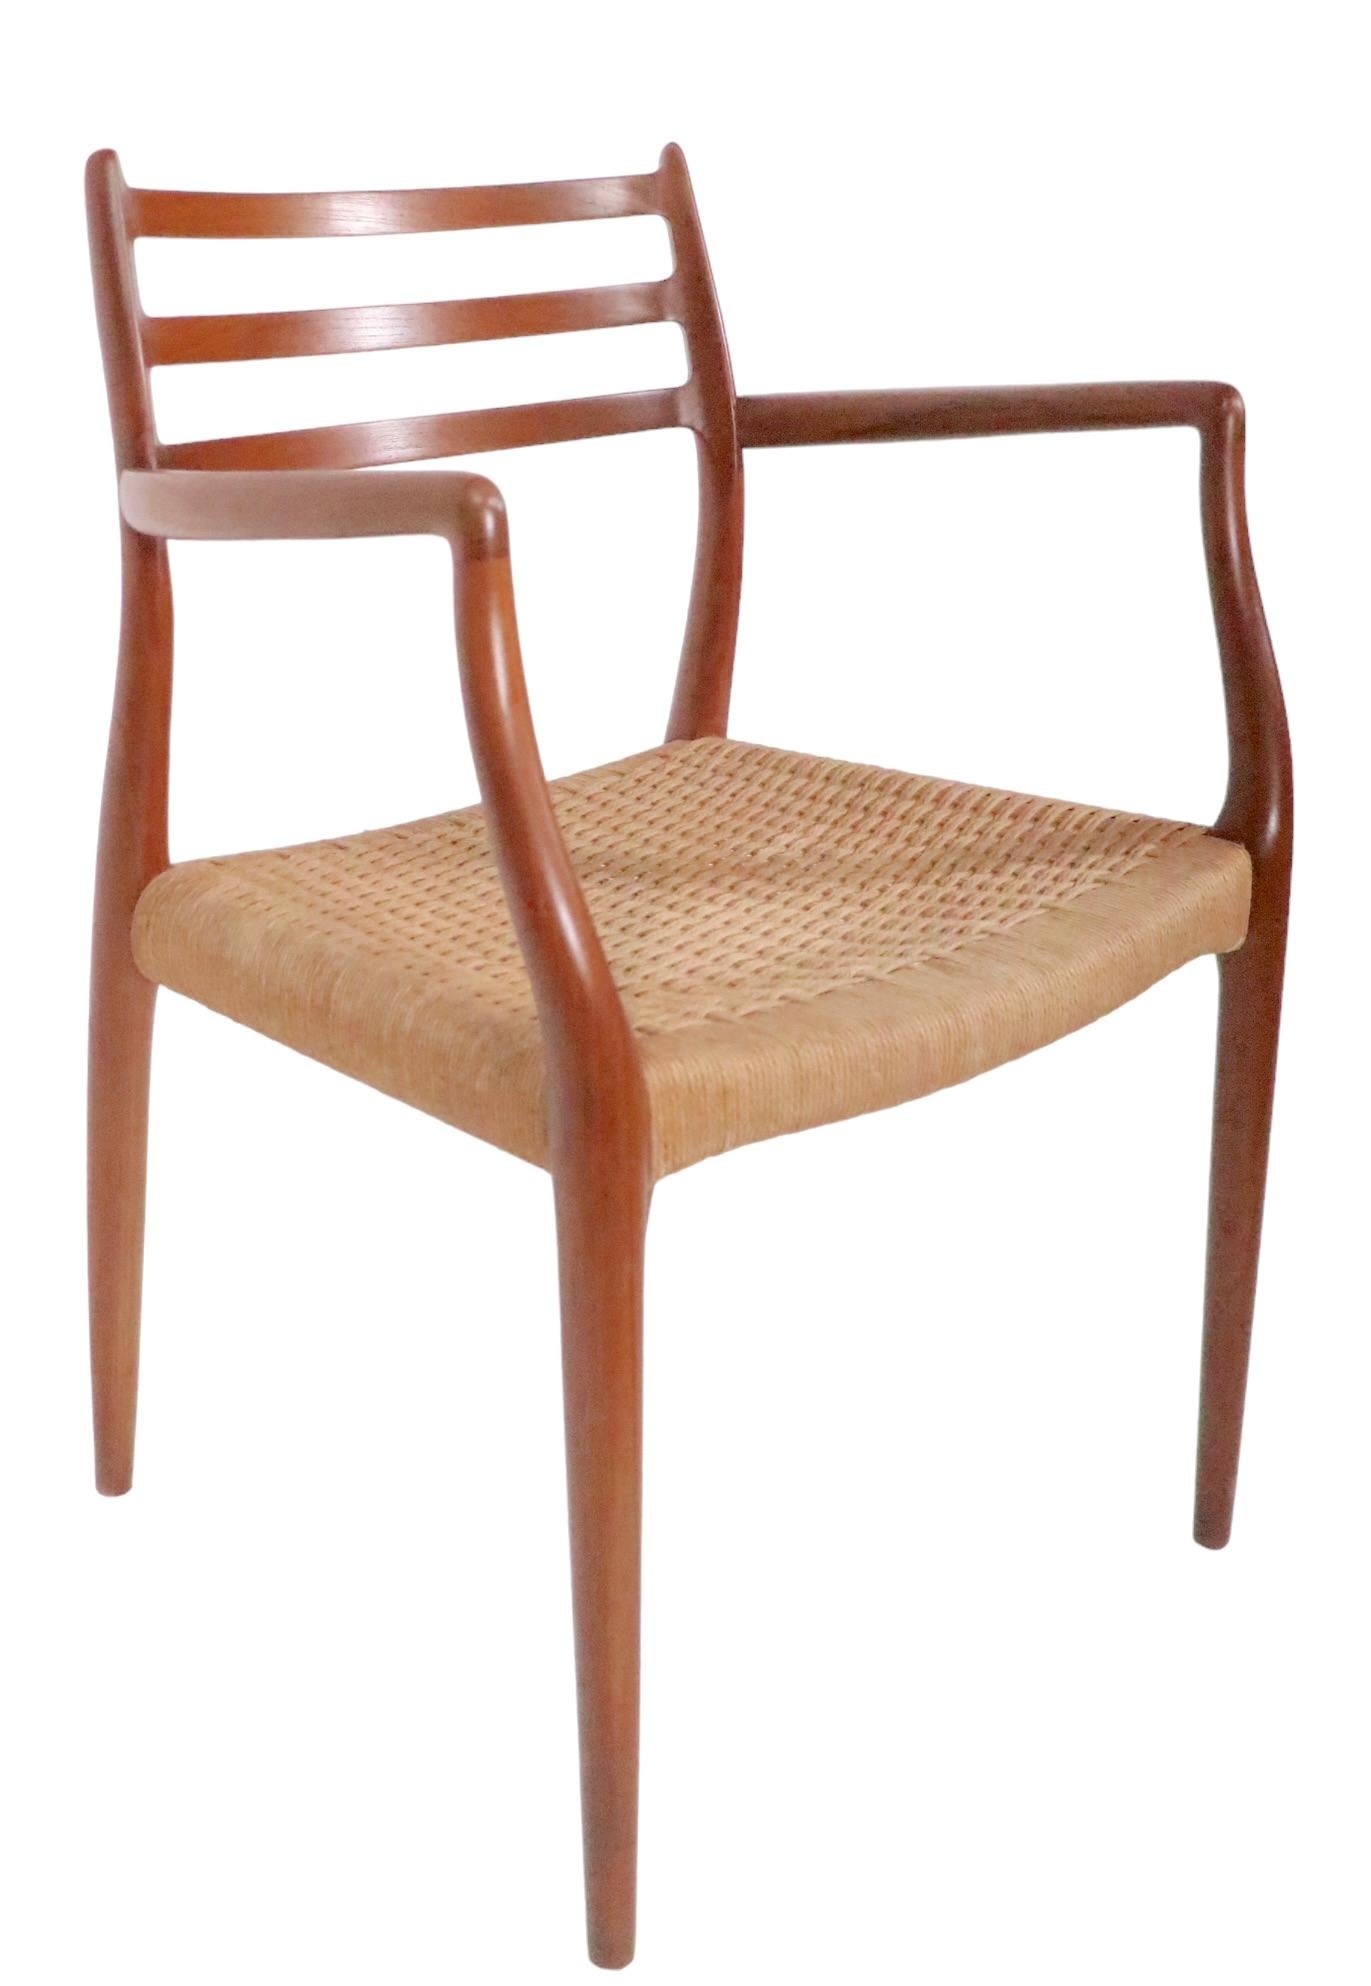 Danish Set of Eight Teak Dining Chairs by Neils Moller / J.L.Moller, circa 1960s For Sale 11